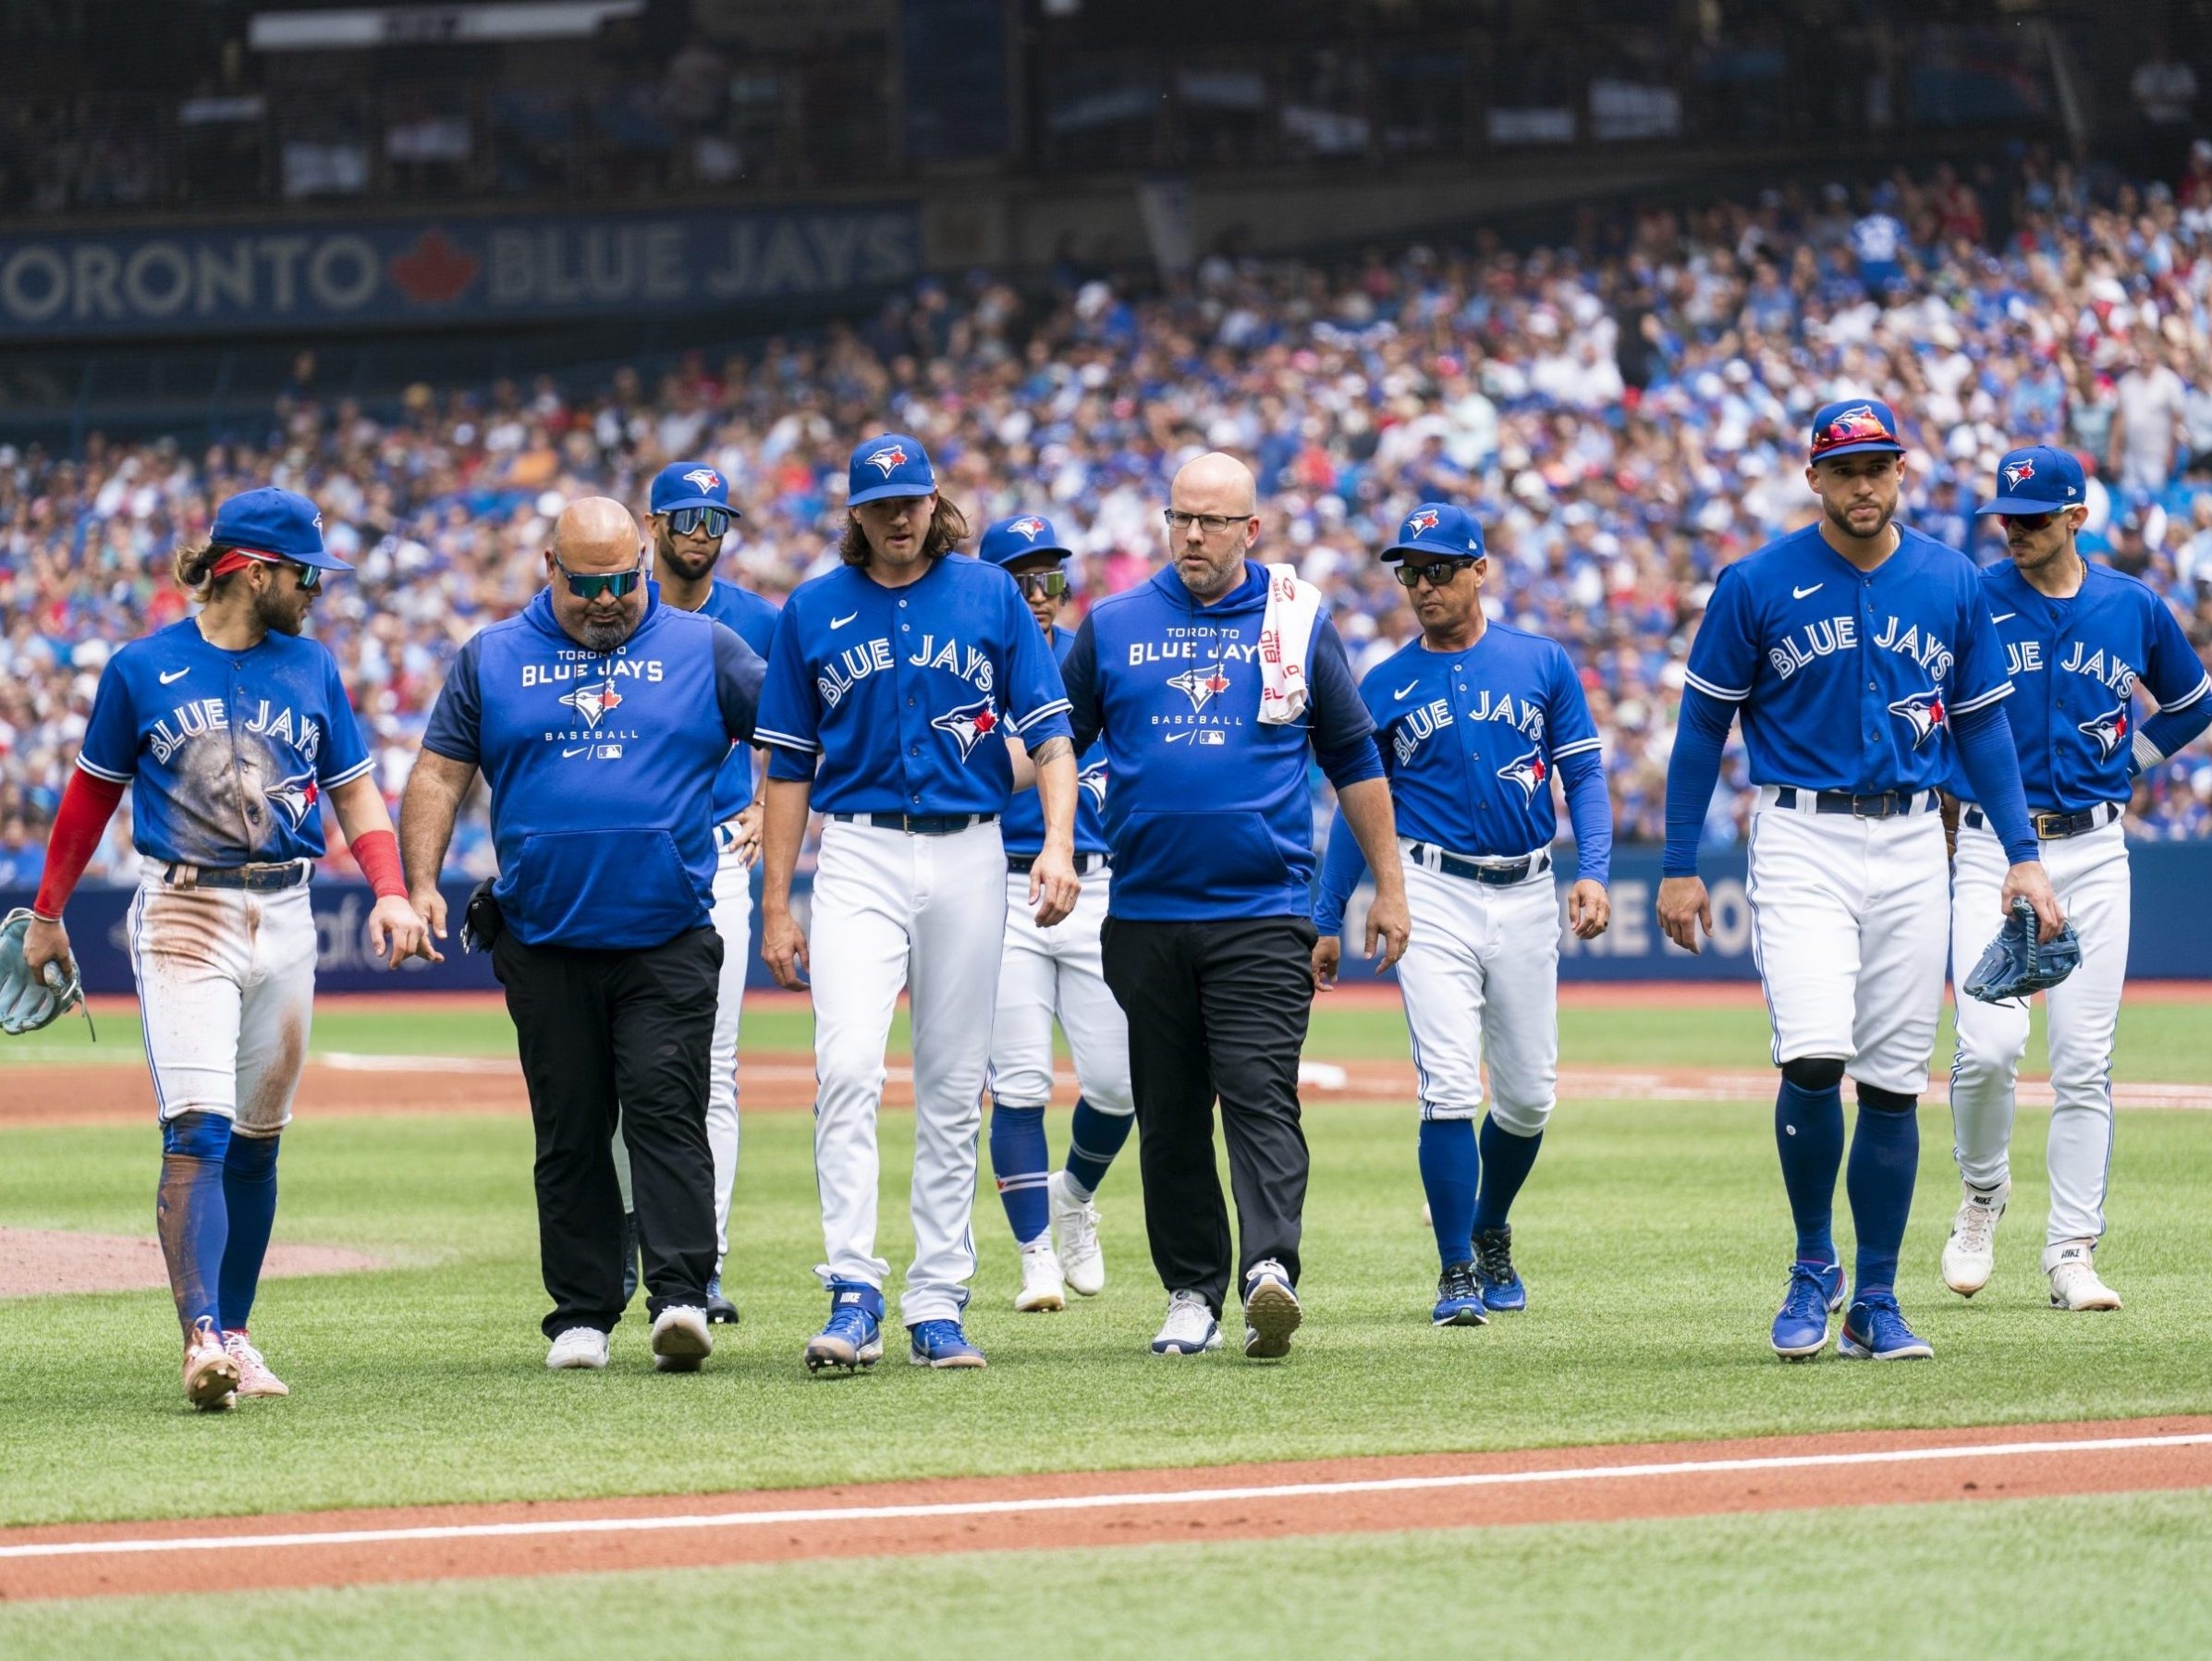 Blue Jays starter Kevin Gausman injured in loss to Rays